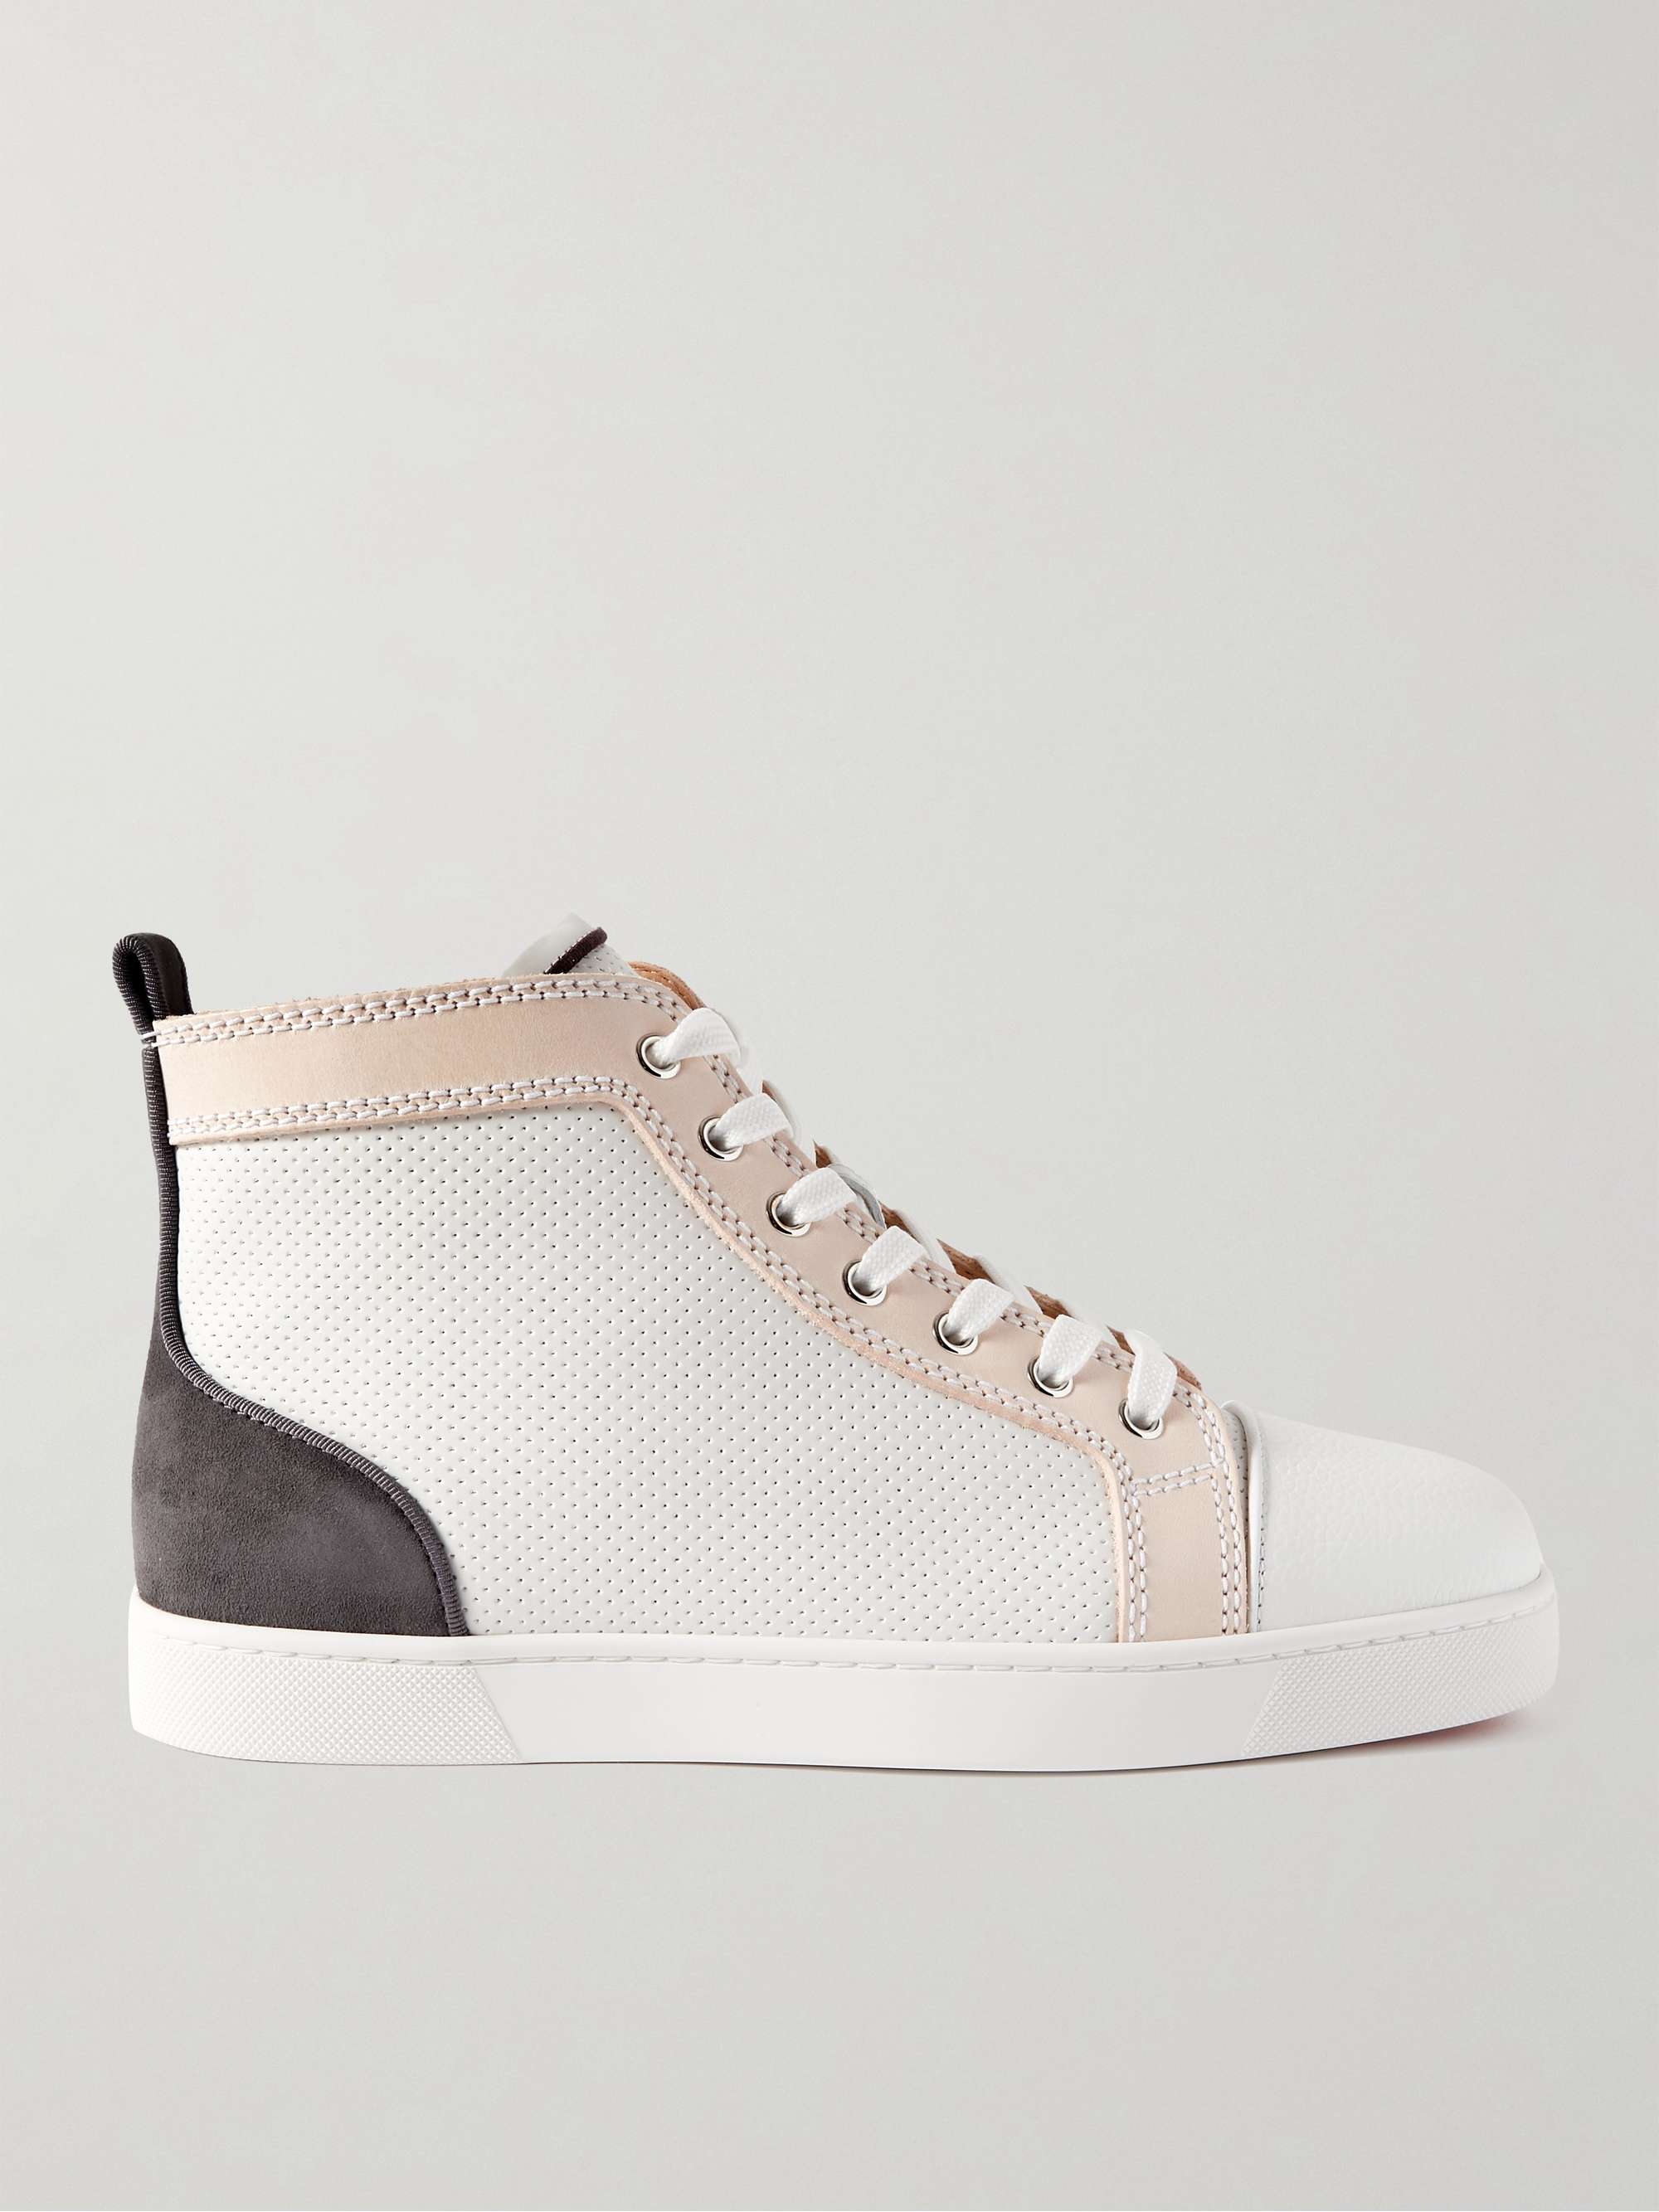 CHRISTIAN LOUBOUTIN Louis Suede-Trimmed Perforated Leather High-Top Sneakers